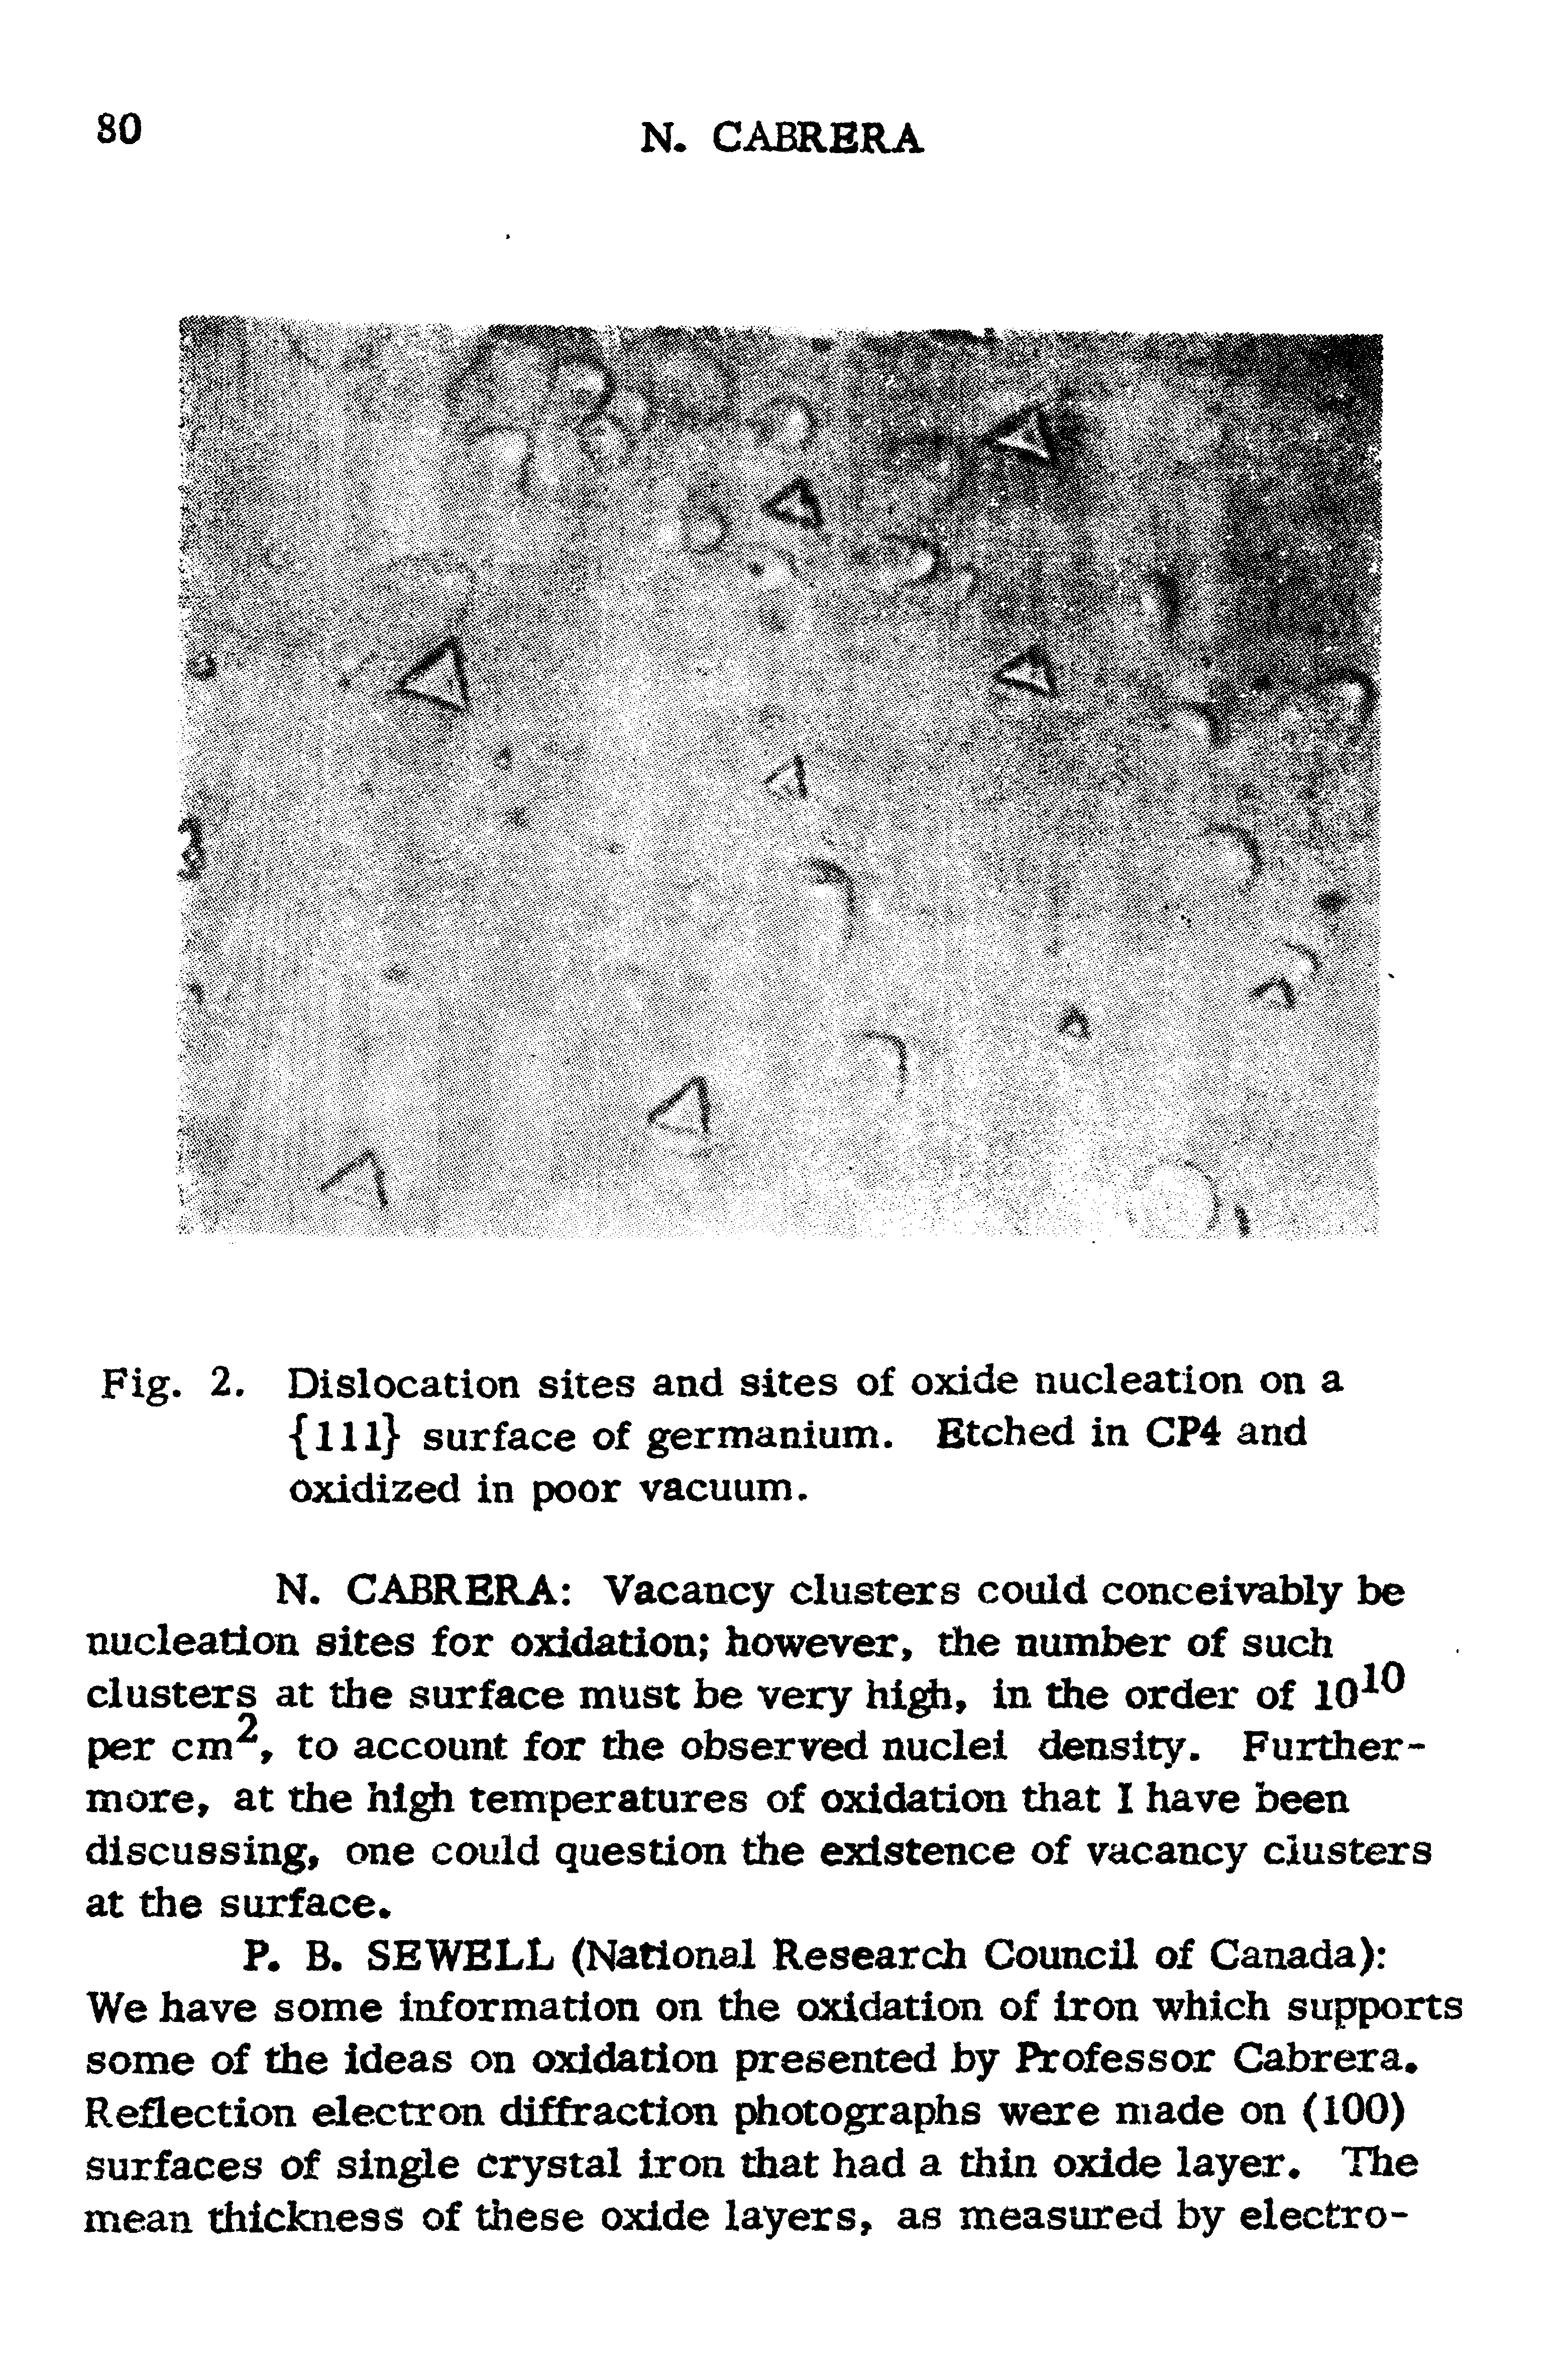 Fig. 2. Dislocation sites and sites of oxide nucleation on a ill surface of germanium. Etched in CP4 and oxidized in poor vacuum.